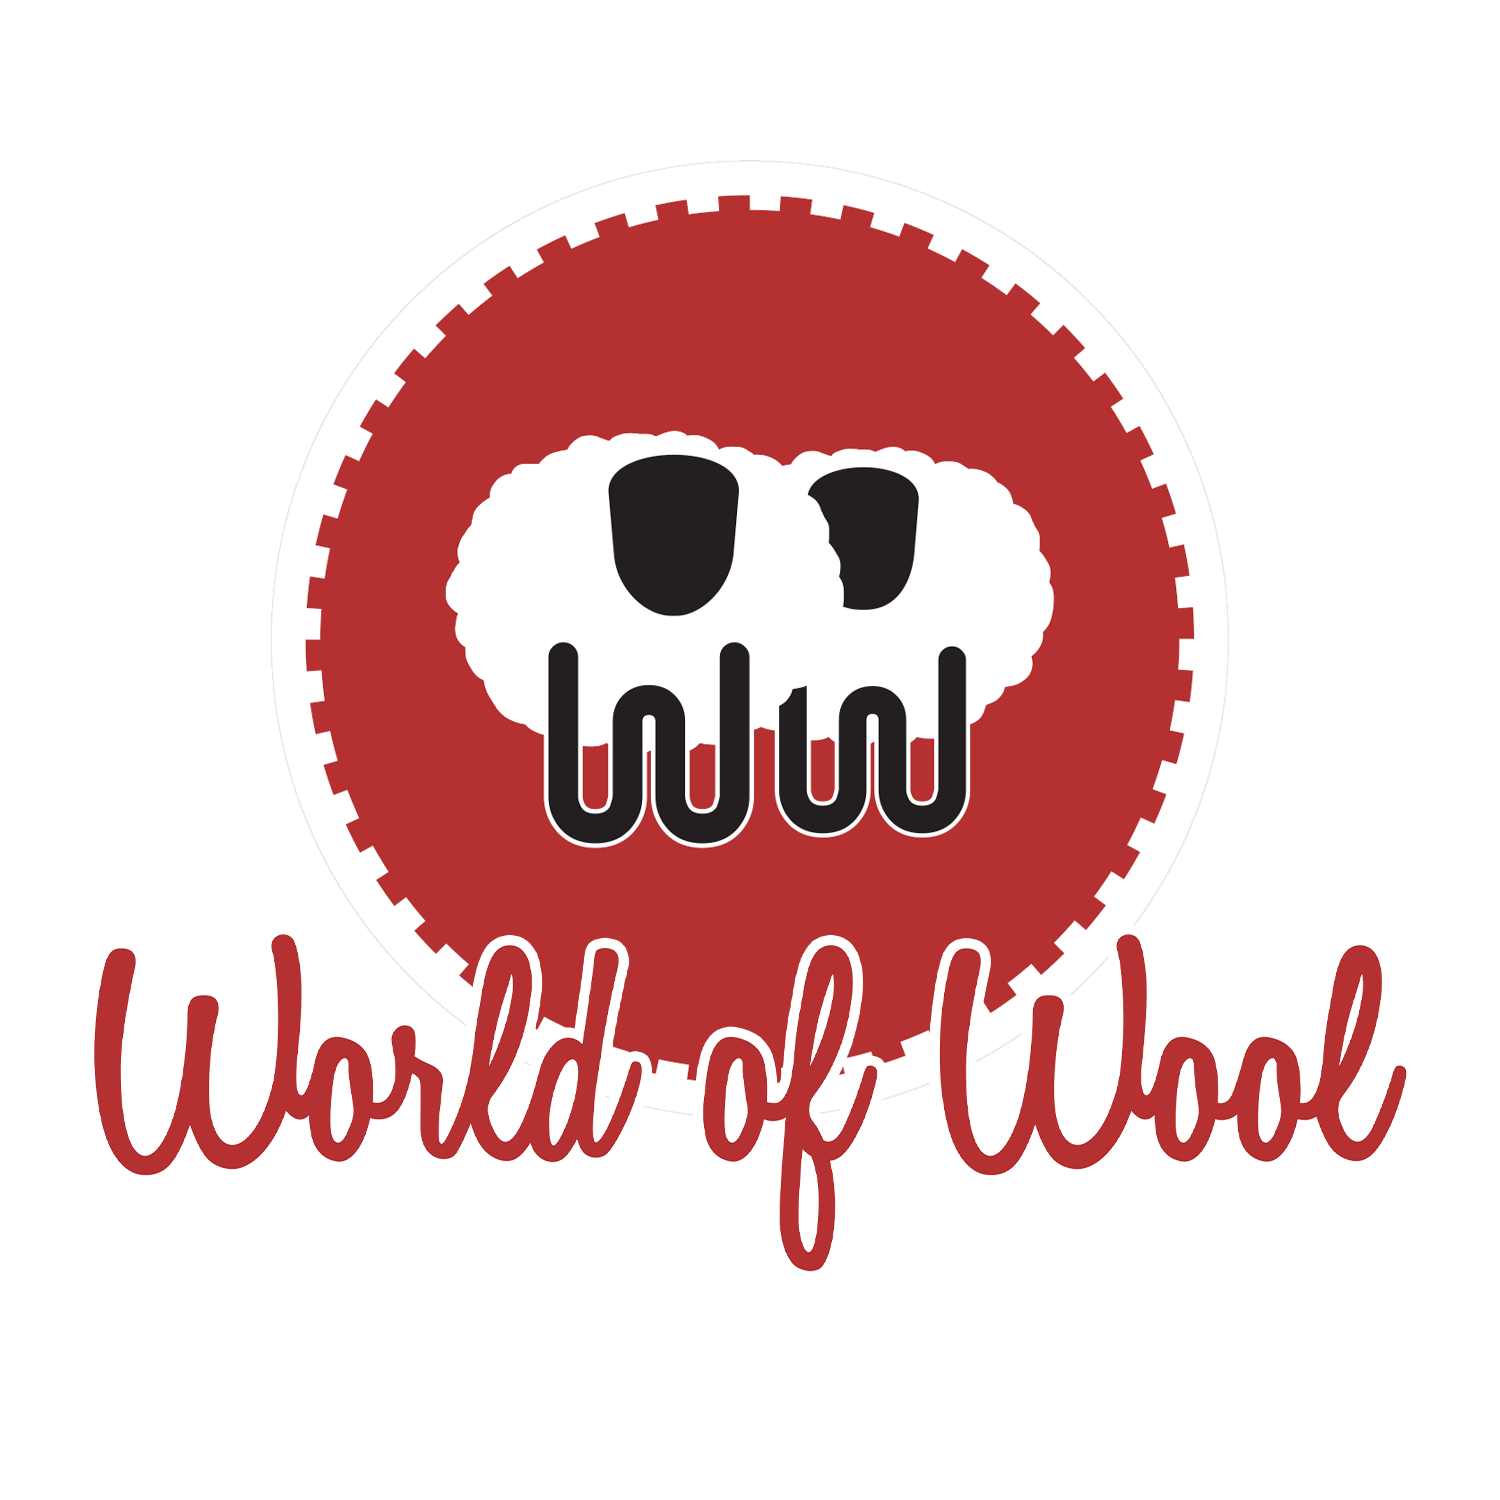 The 2023 World of Wool Website Relaunch